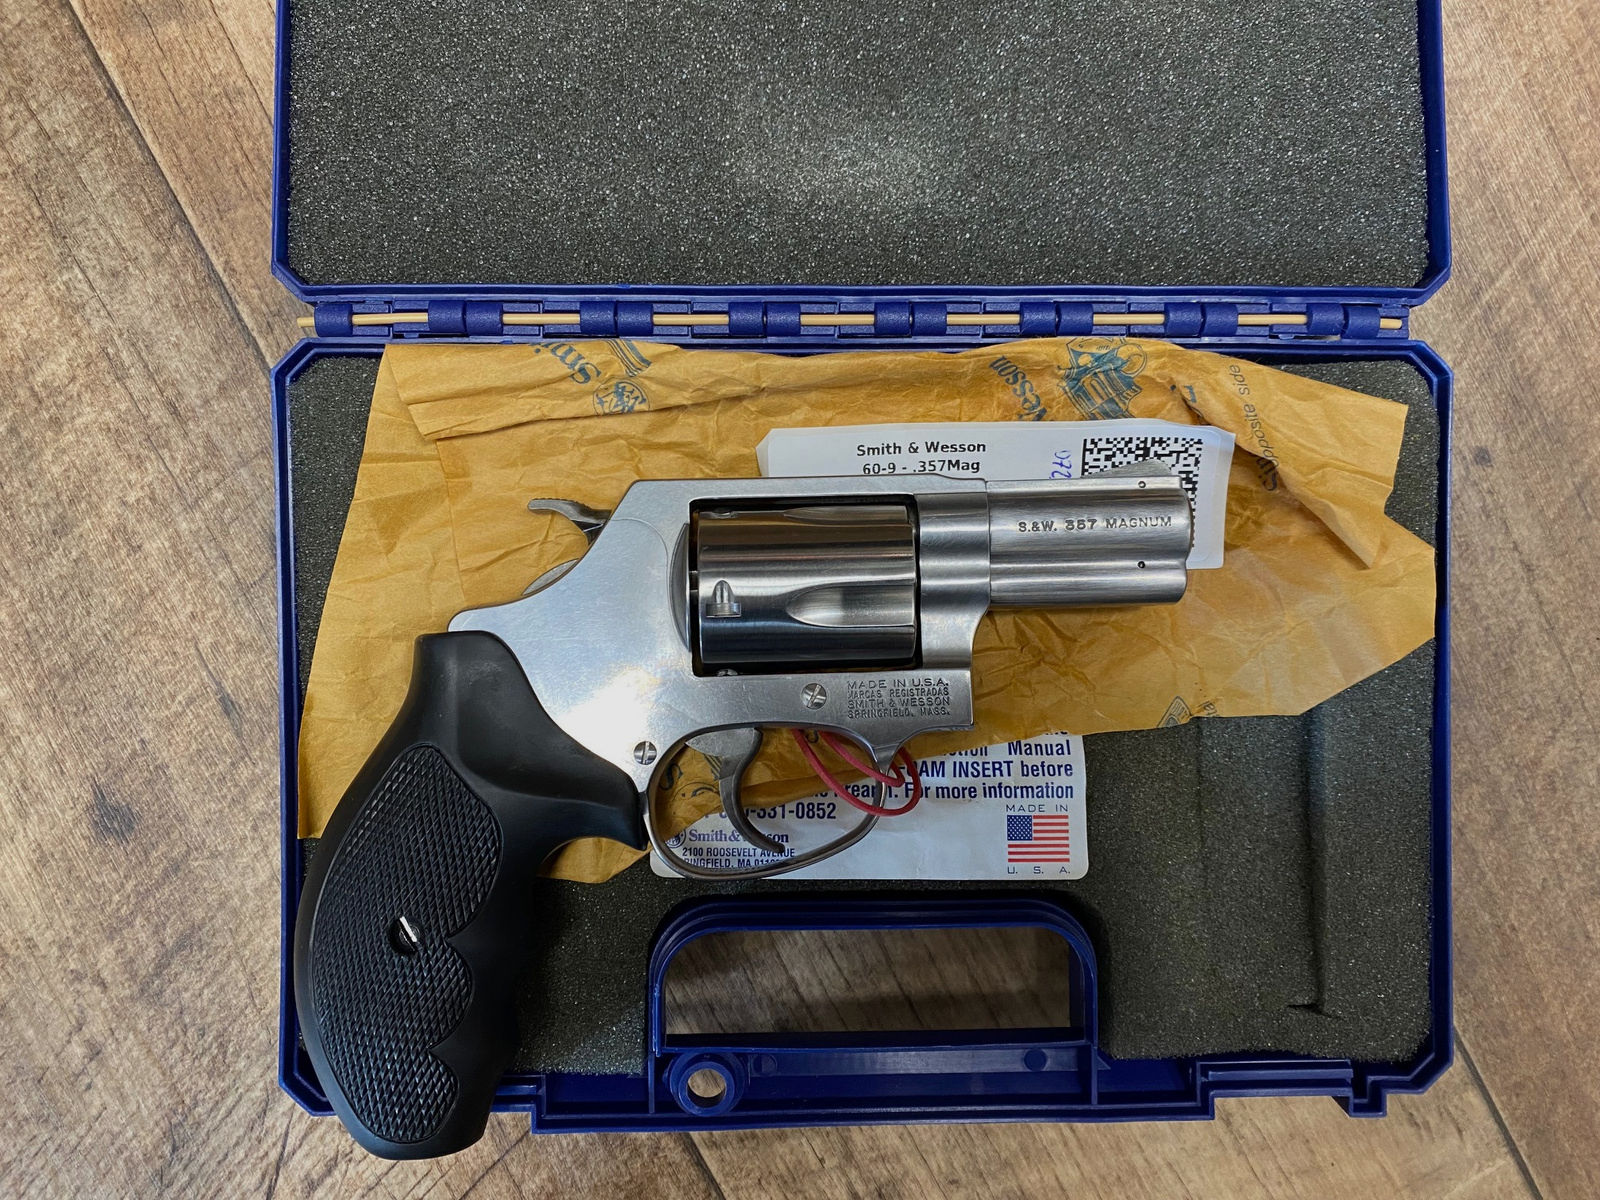 Smith & Wesson 66-9 .357mag 